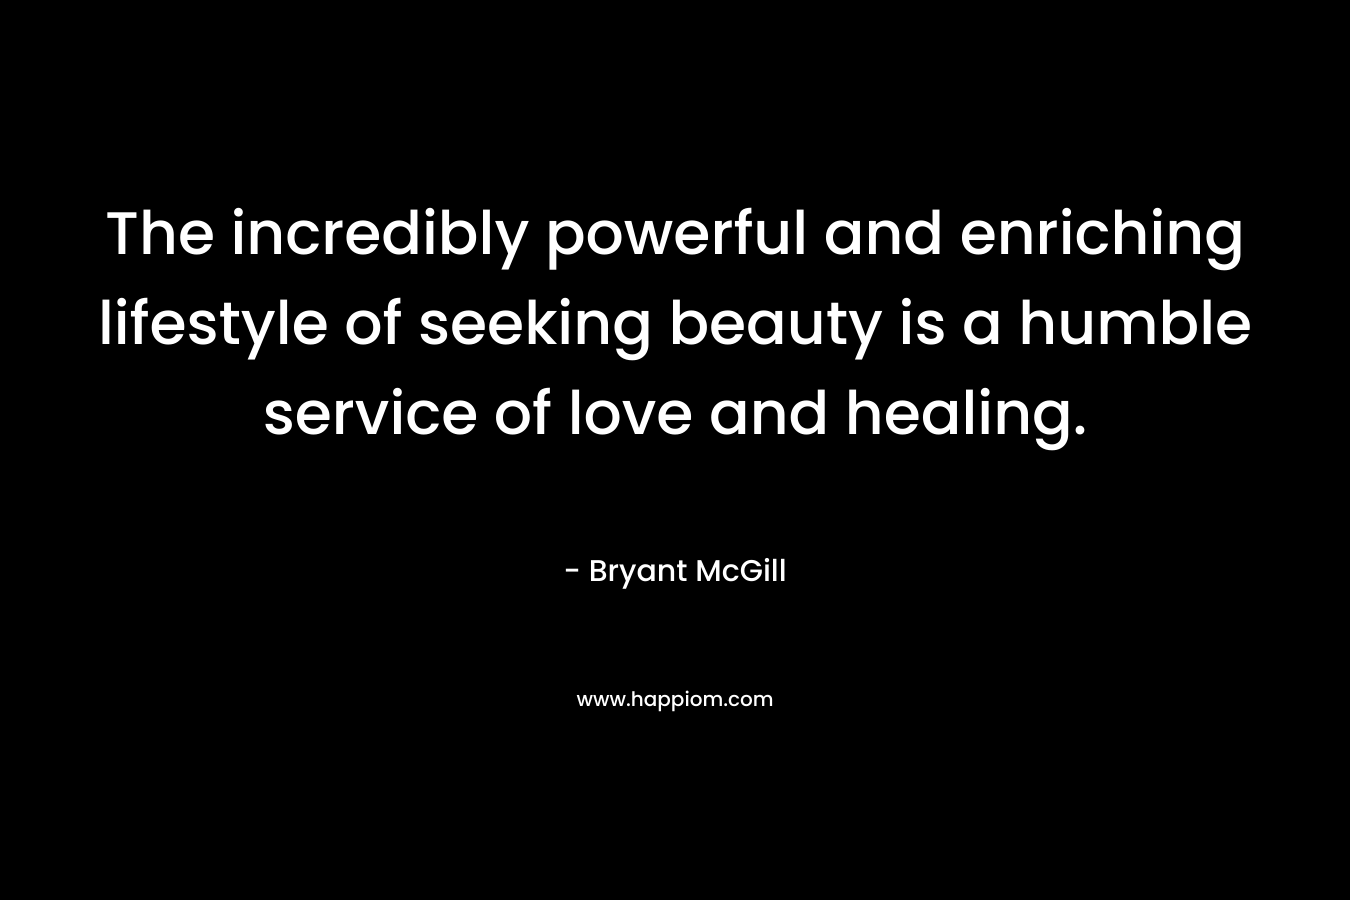 The incredibly powerful and enriching lifestyle of seeking beauty is a humble service of love and healing. – Bryant McGill